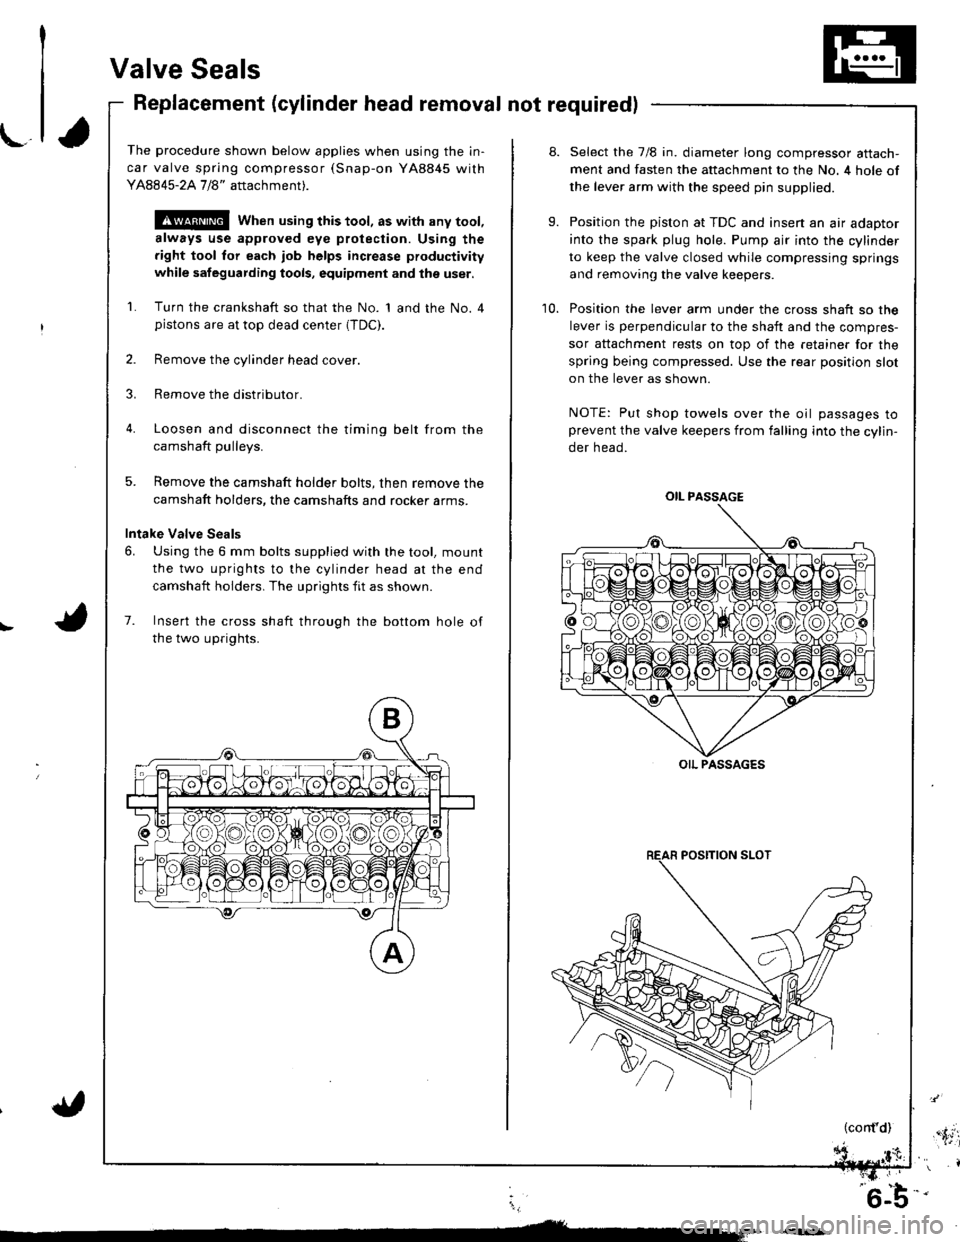 HONDA INTEGRA 1998 4.G Repair Manual Valve Seals
Replacement (cylinder head removal not required)
The procedure shown below applies when using the in-
car valve spring compressor (Snap-on YA8845 with
Y AAA45-2A 1 /8" attachment).
!@@ Whe